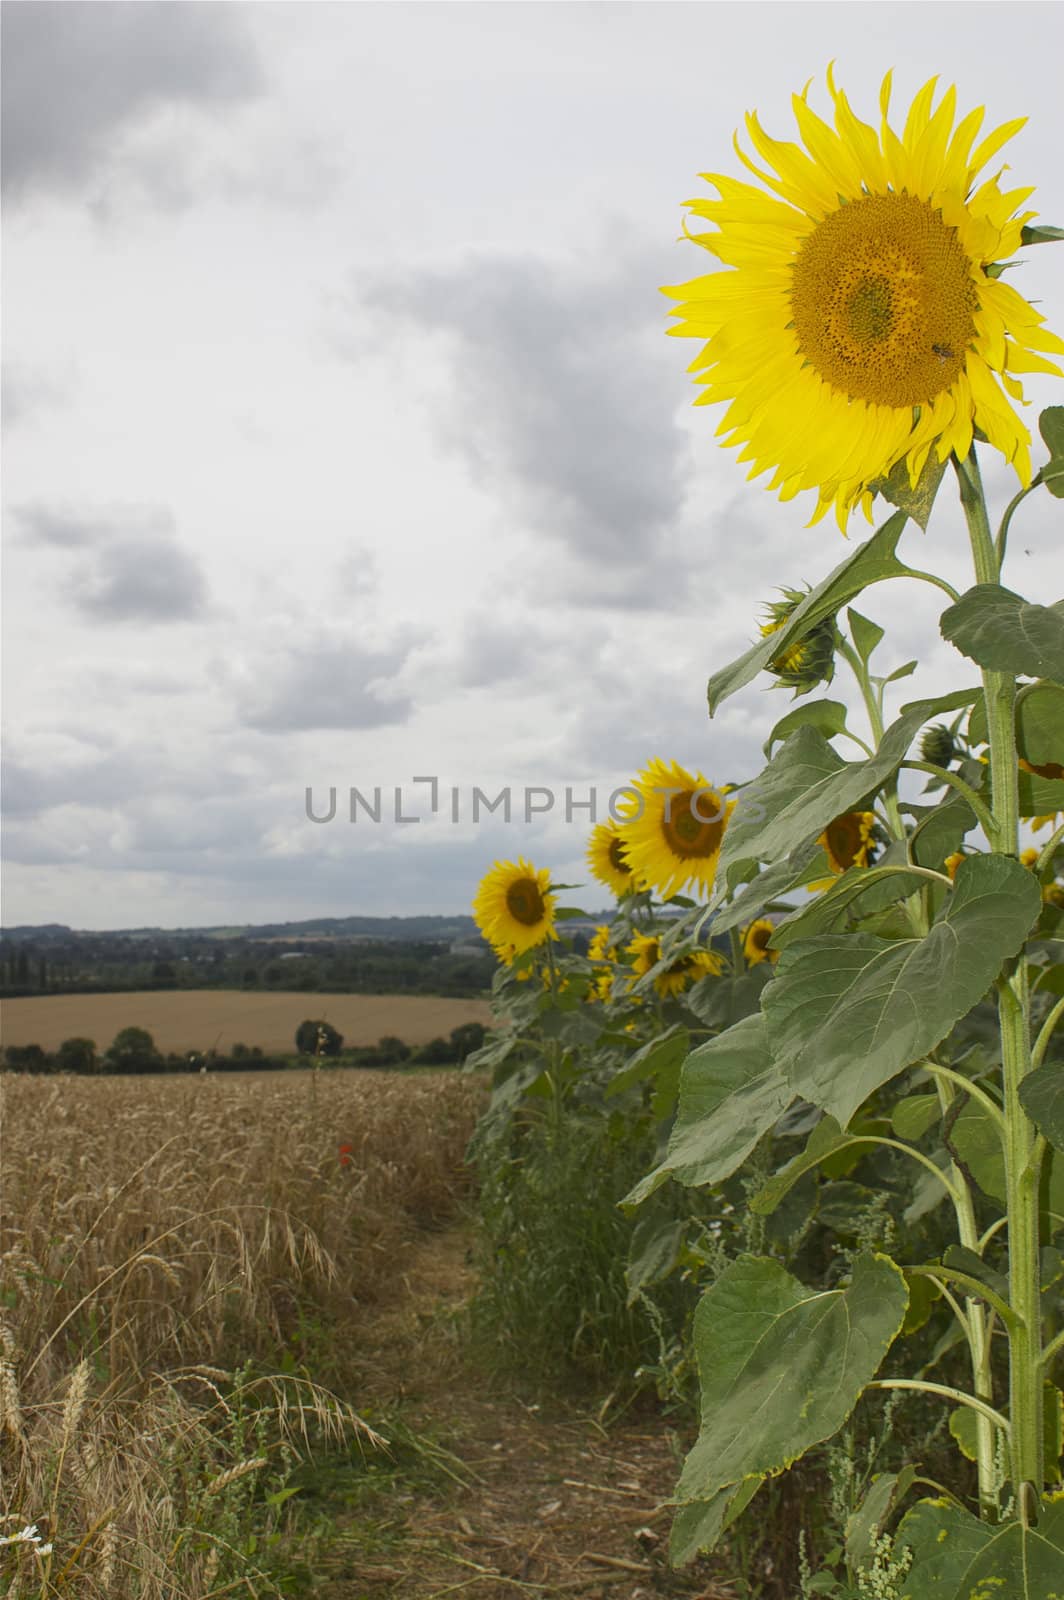 Sunflowers in a rural setting, facing into camera, against an agricultural/ rural background and white sky, with copy space.